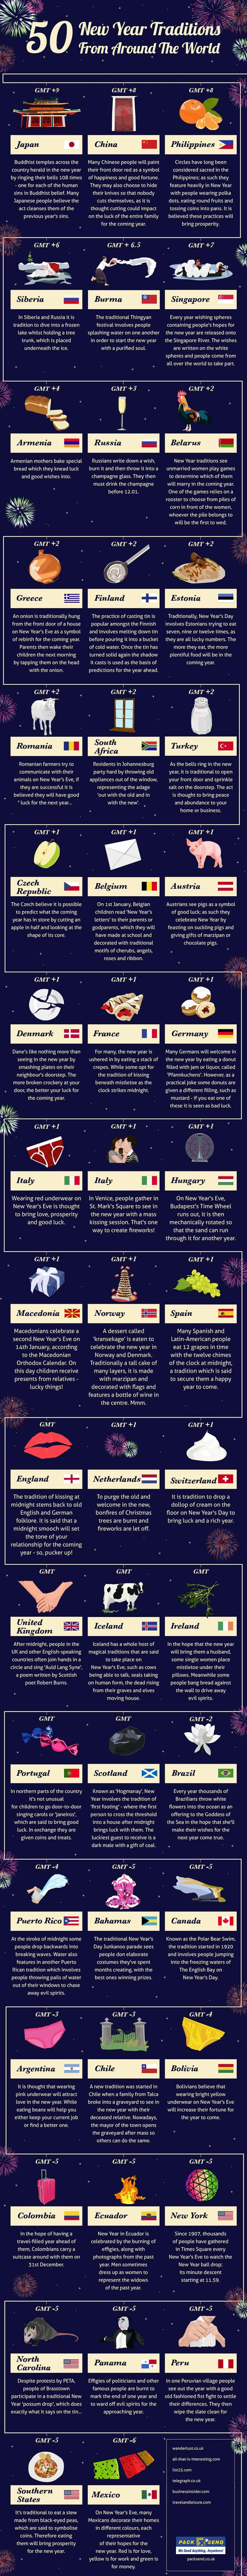 50 New Year Traditions from Around the World